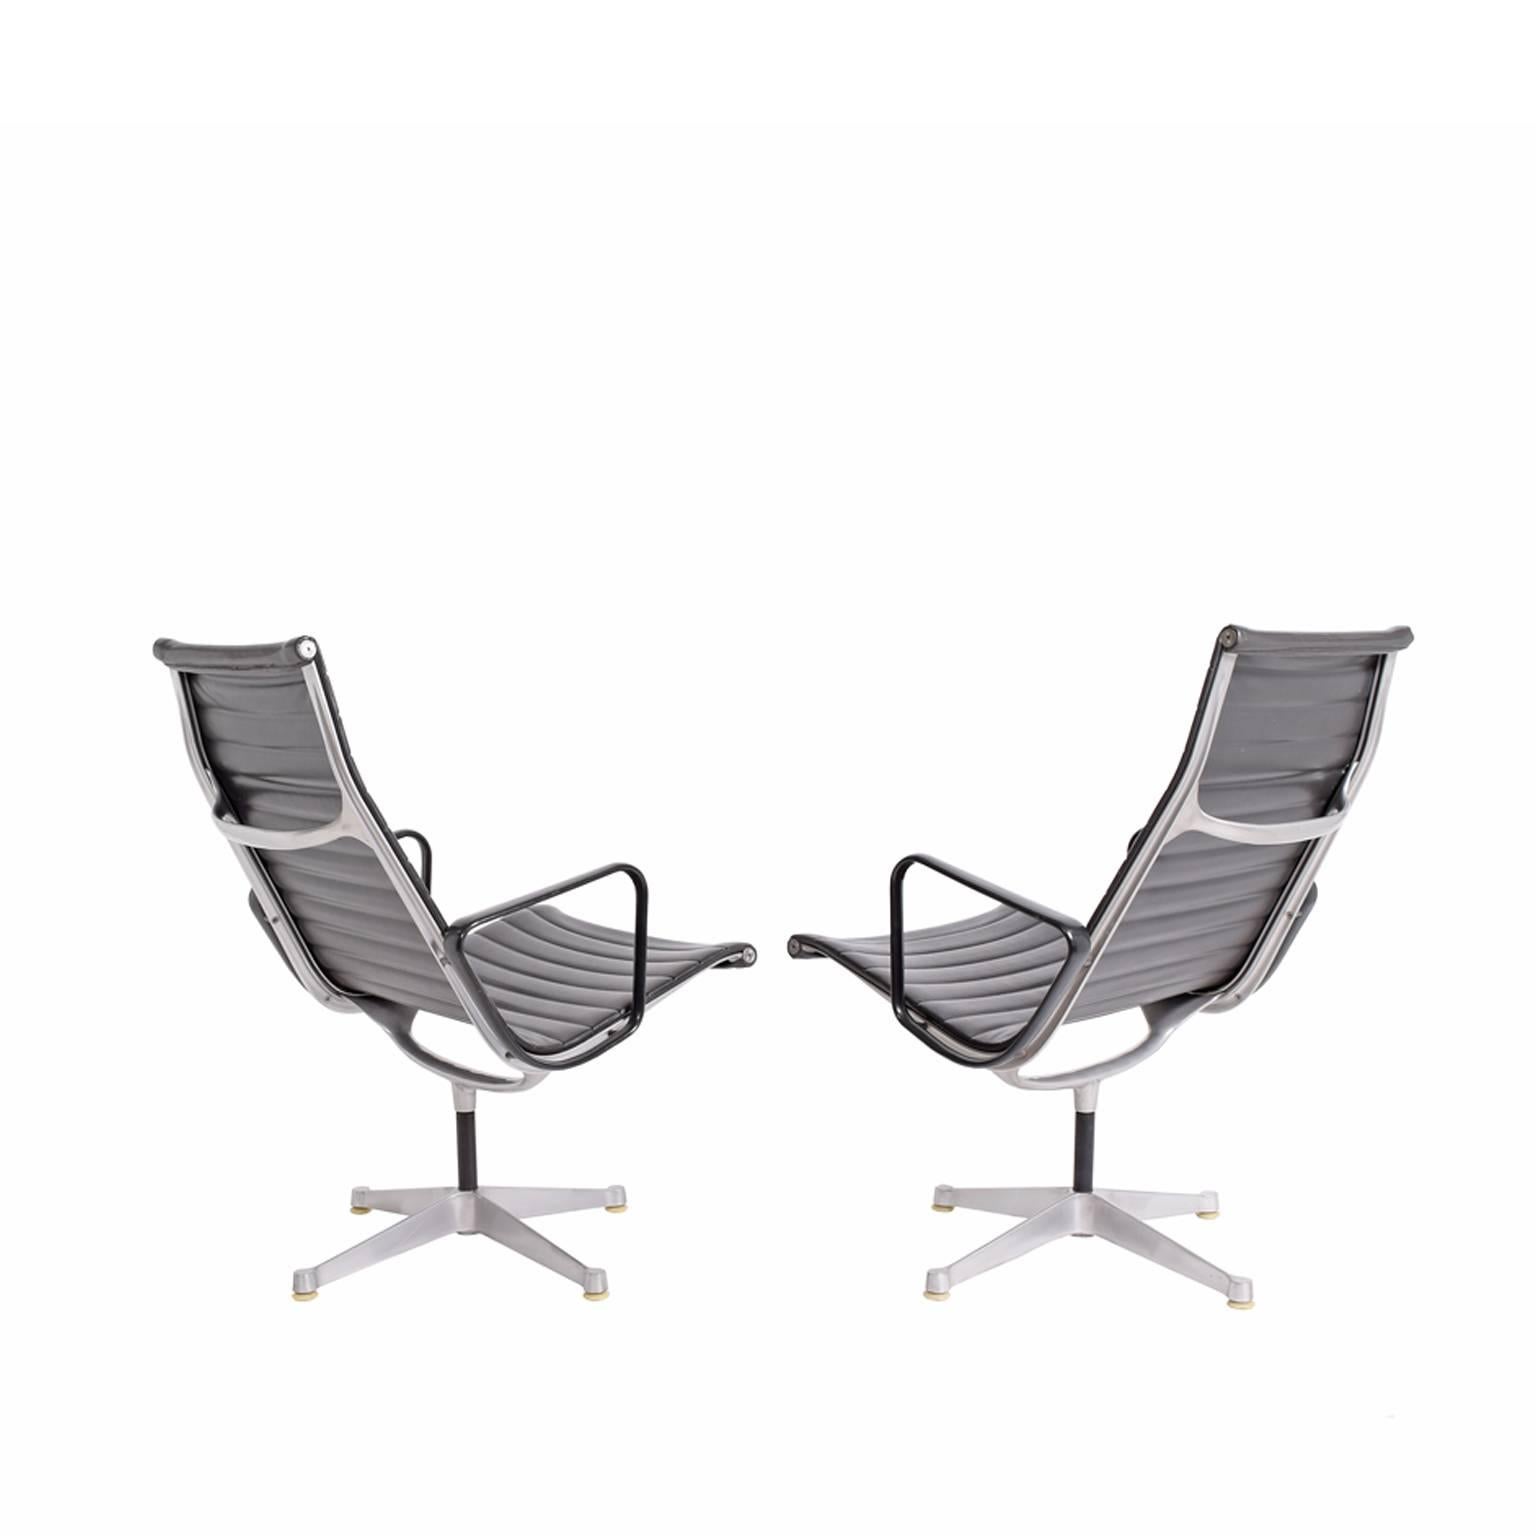 Early Eames Aluminum Group swiveling lounge chairs with first production bases, black painted arms and black vinyl seating. Herman Miller stamp.